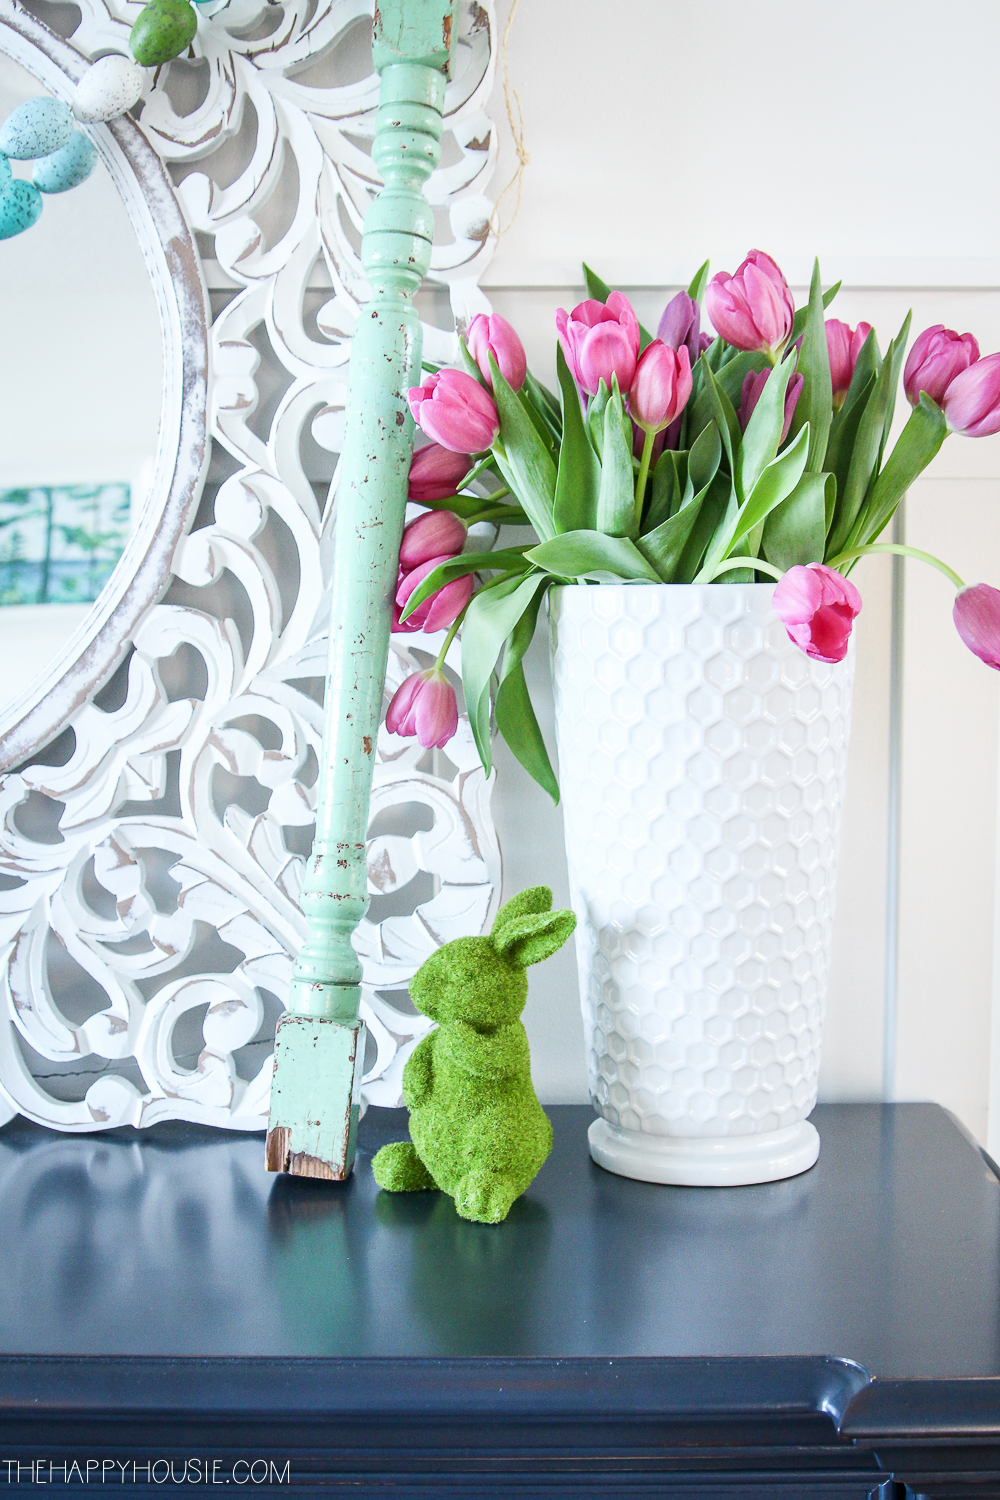 Pink tulips in a white vase with a green bunny beside them.